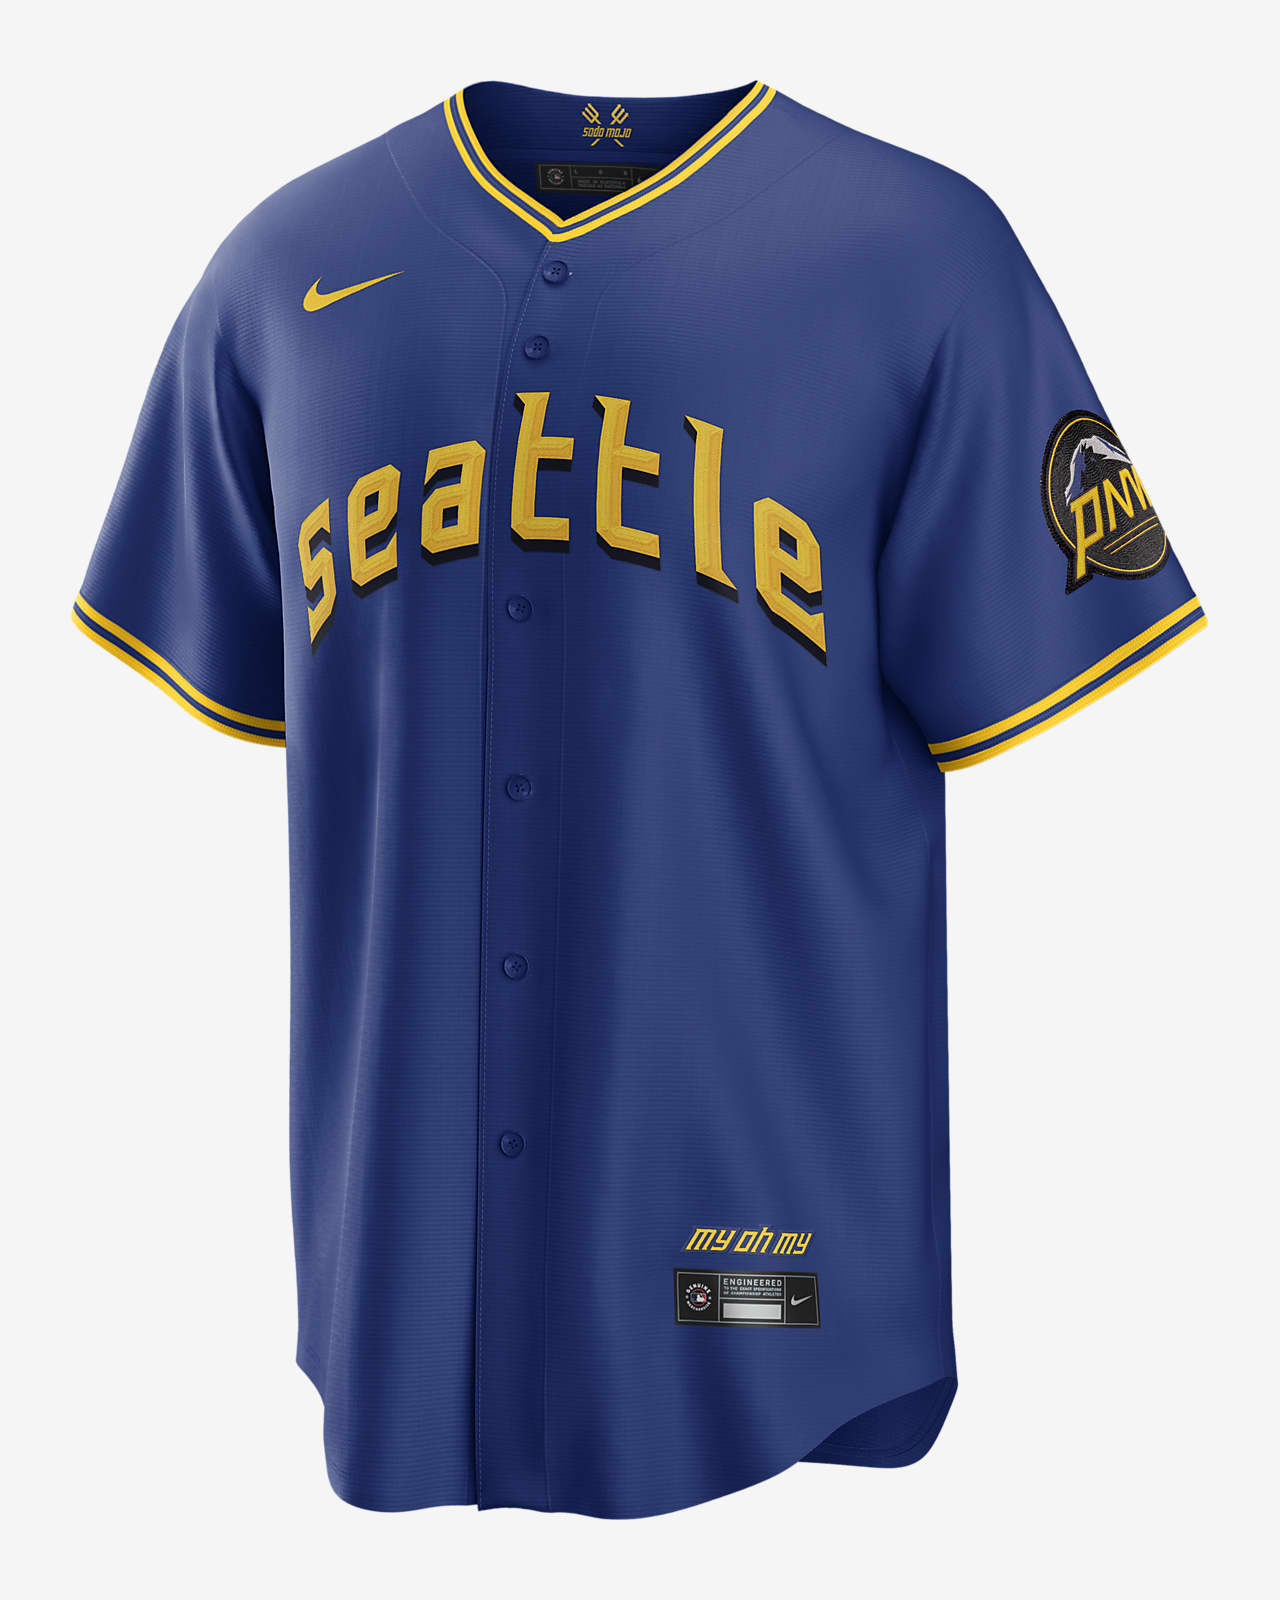 Why Baseball Purists Are Unhappy With Nikes Logo on Jerseys